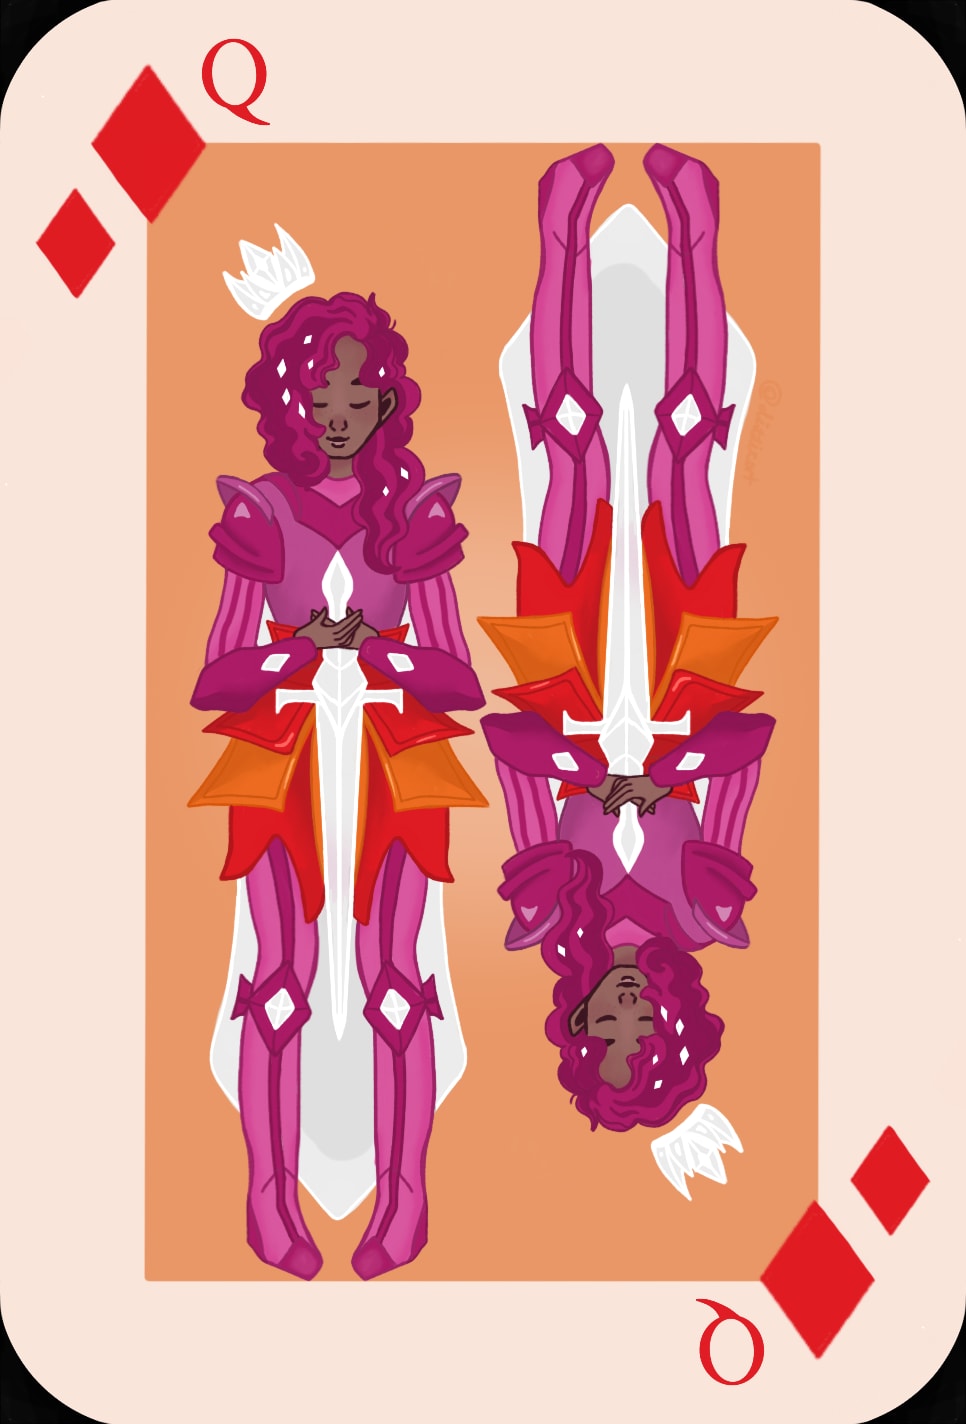 Queen of Dimonds - second design in my pride themed playing card series